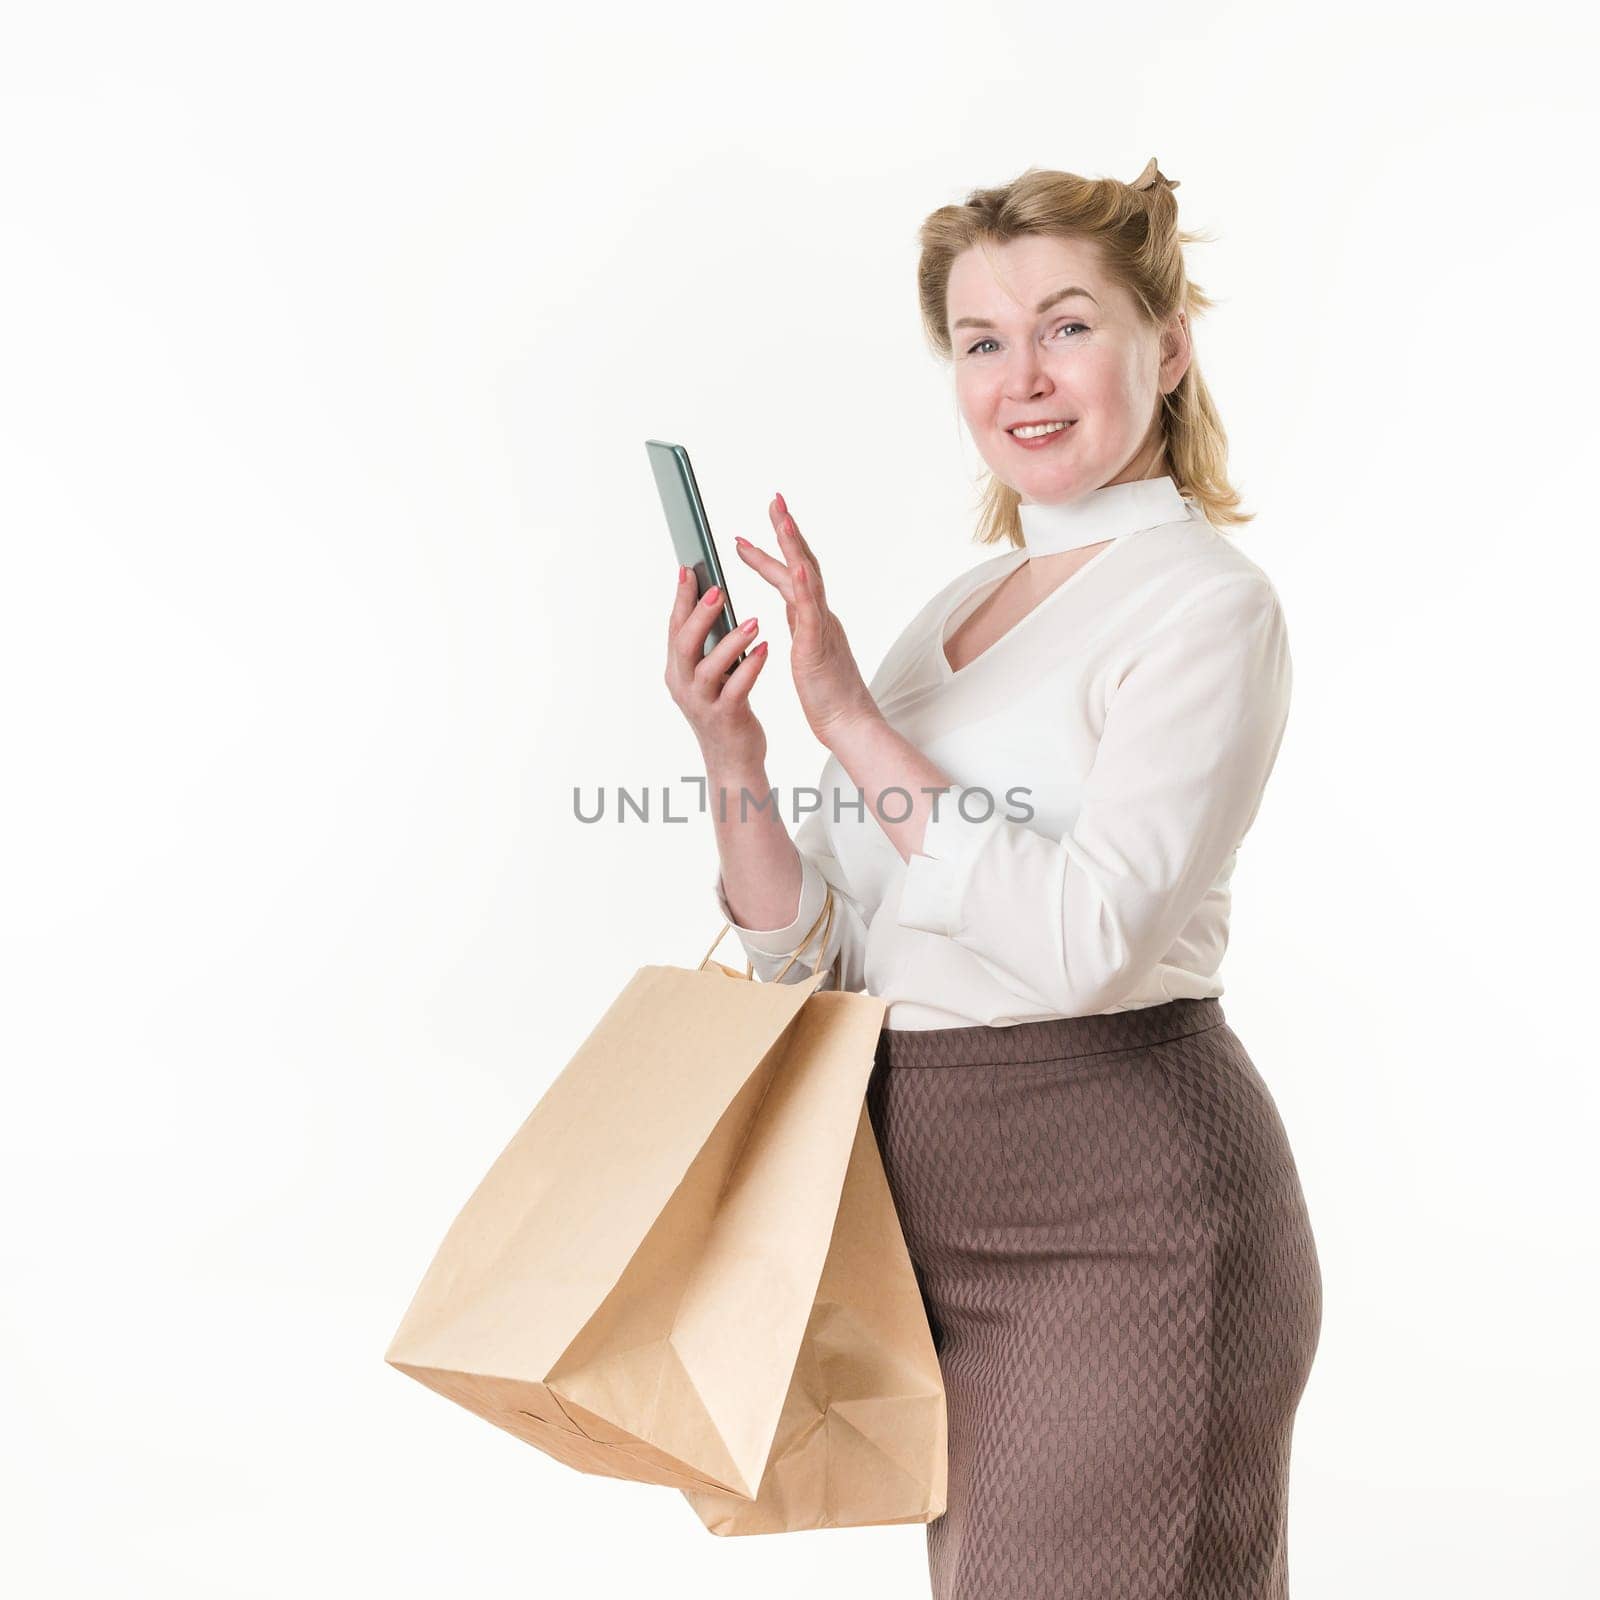 Woman buyer holds smartphone in hand and orders in an online shopping store. Satisfied caucasian ethnicity female 49 years old dressed in white blouse and brown skirt. Studio shot on white background